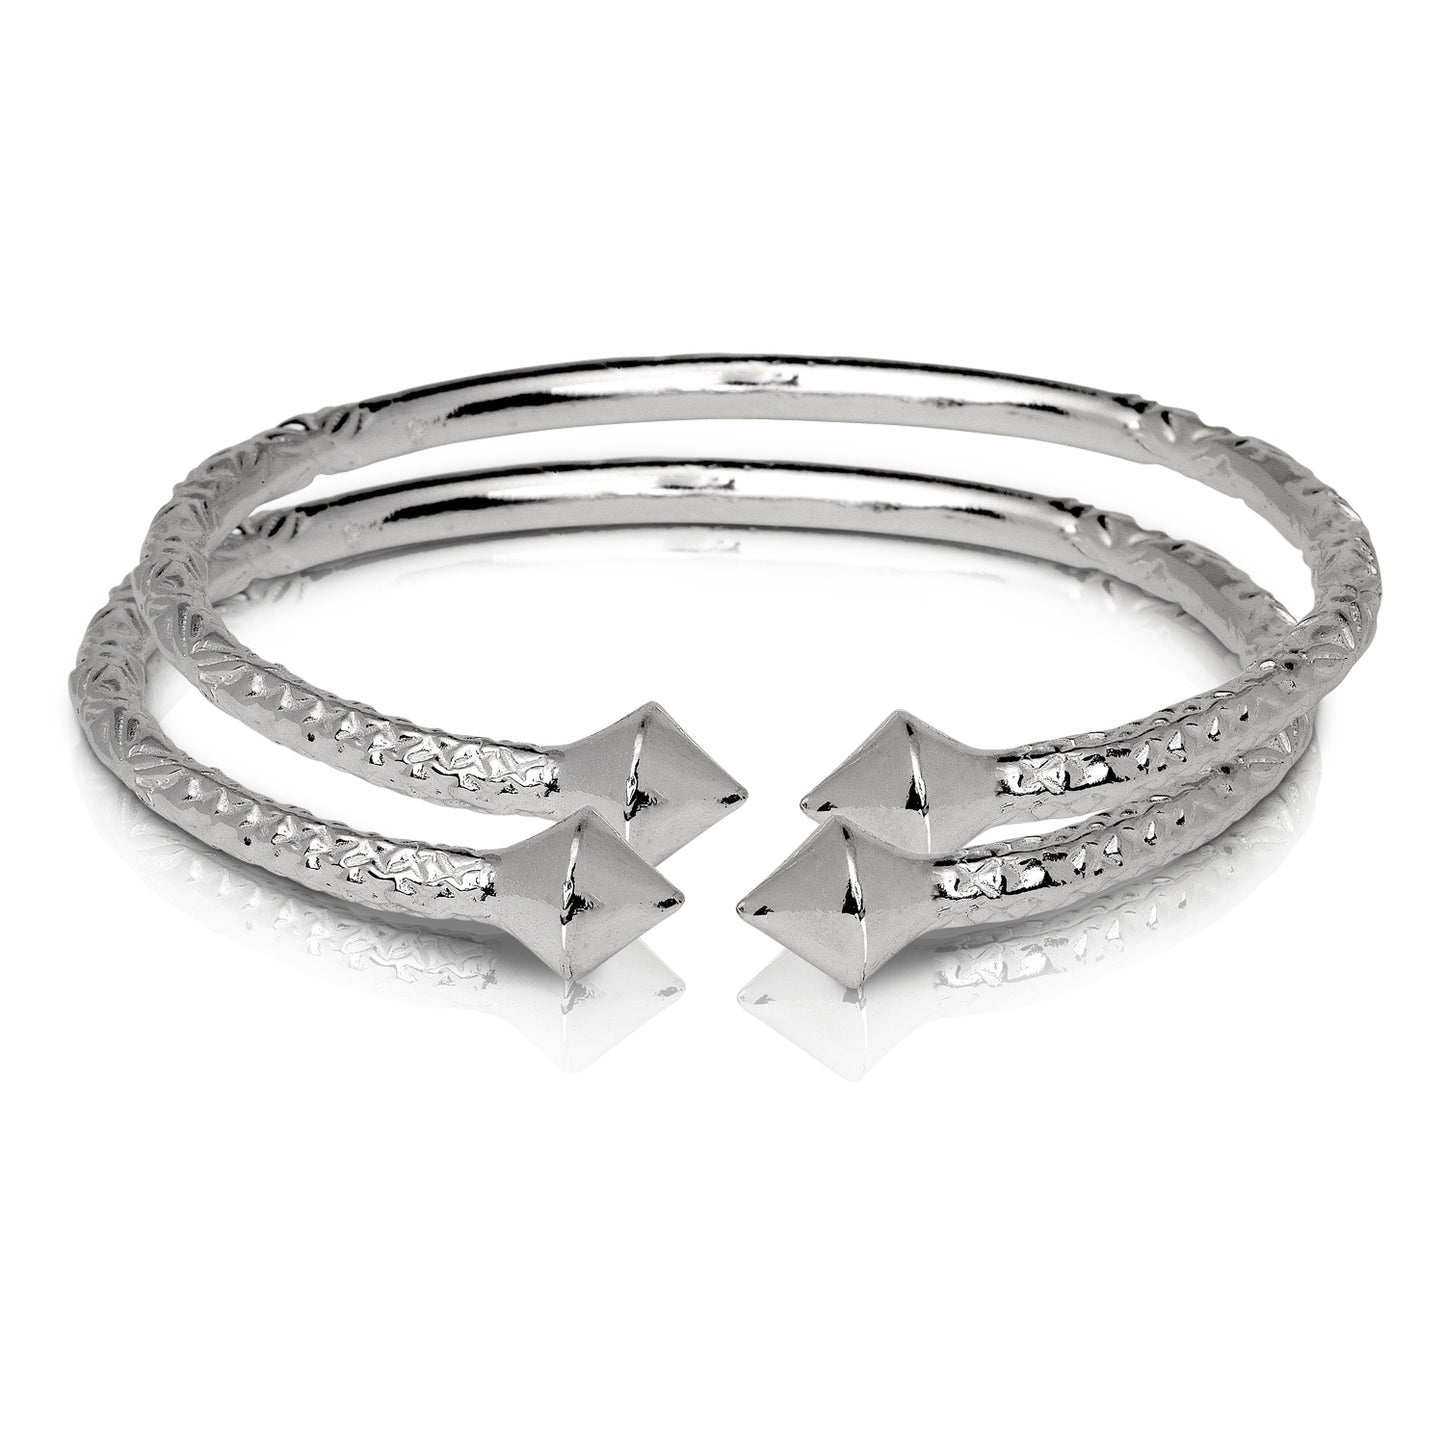 Better Jewelry Thick Pyramid Ends .925 Sterling Silver West Indian Bangles, 1 pair